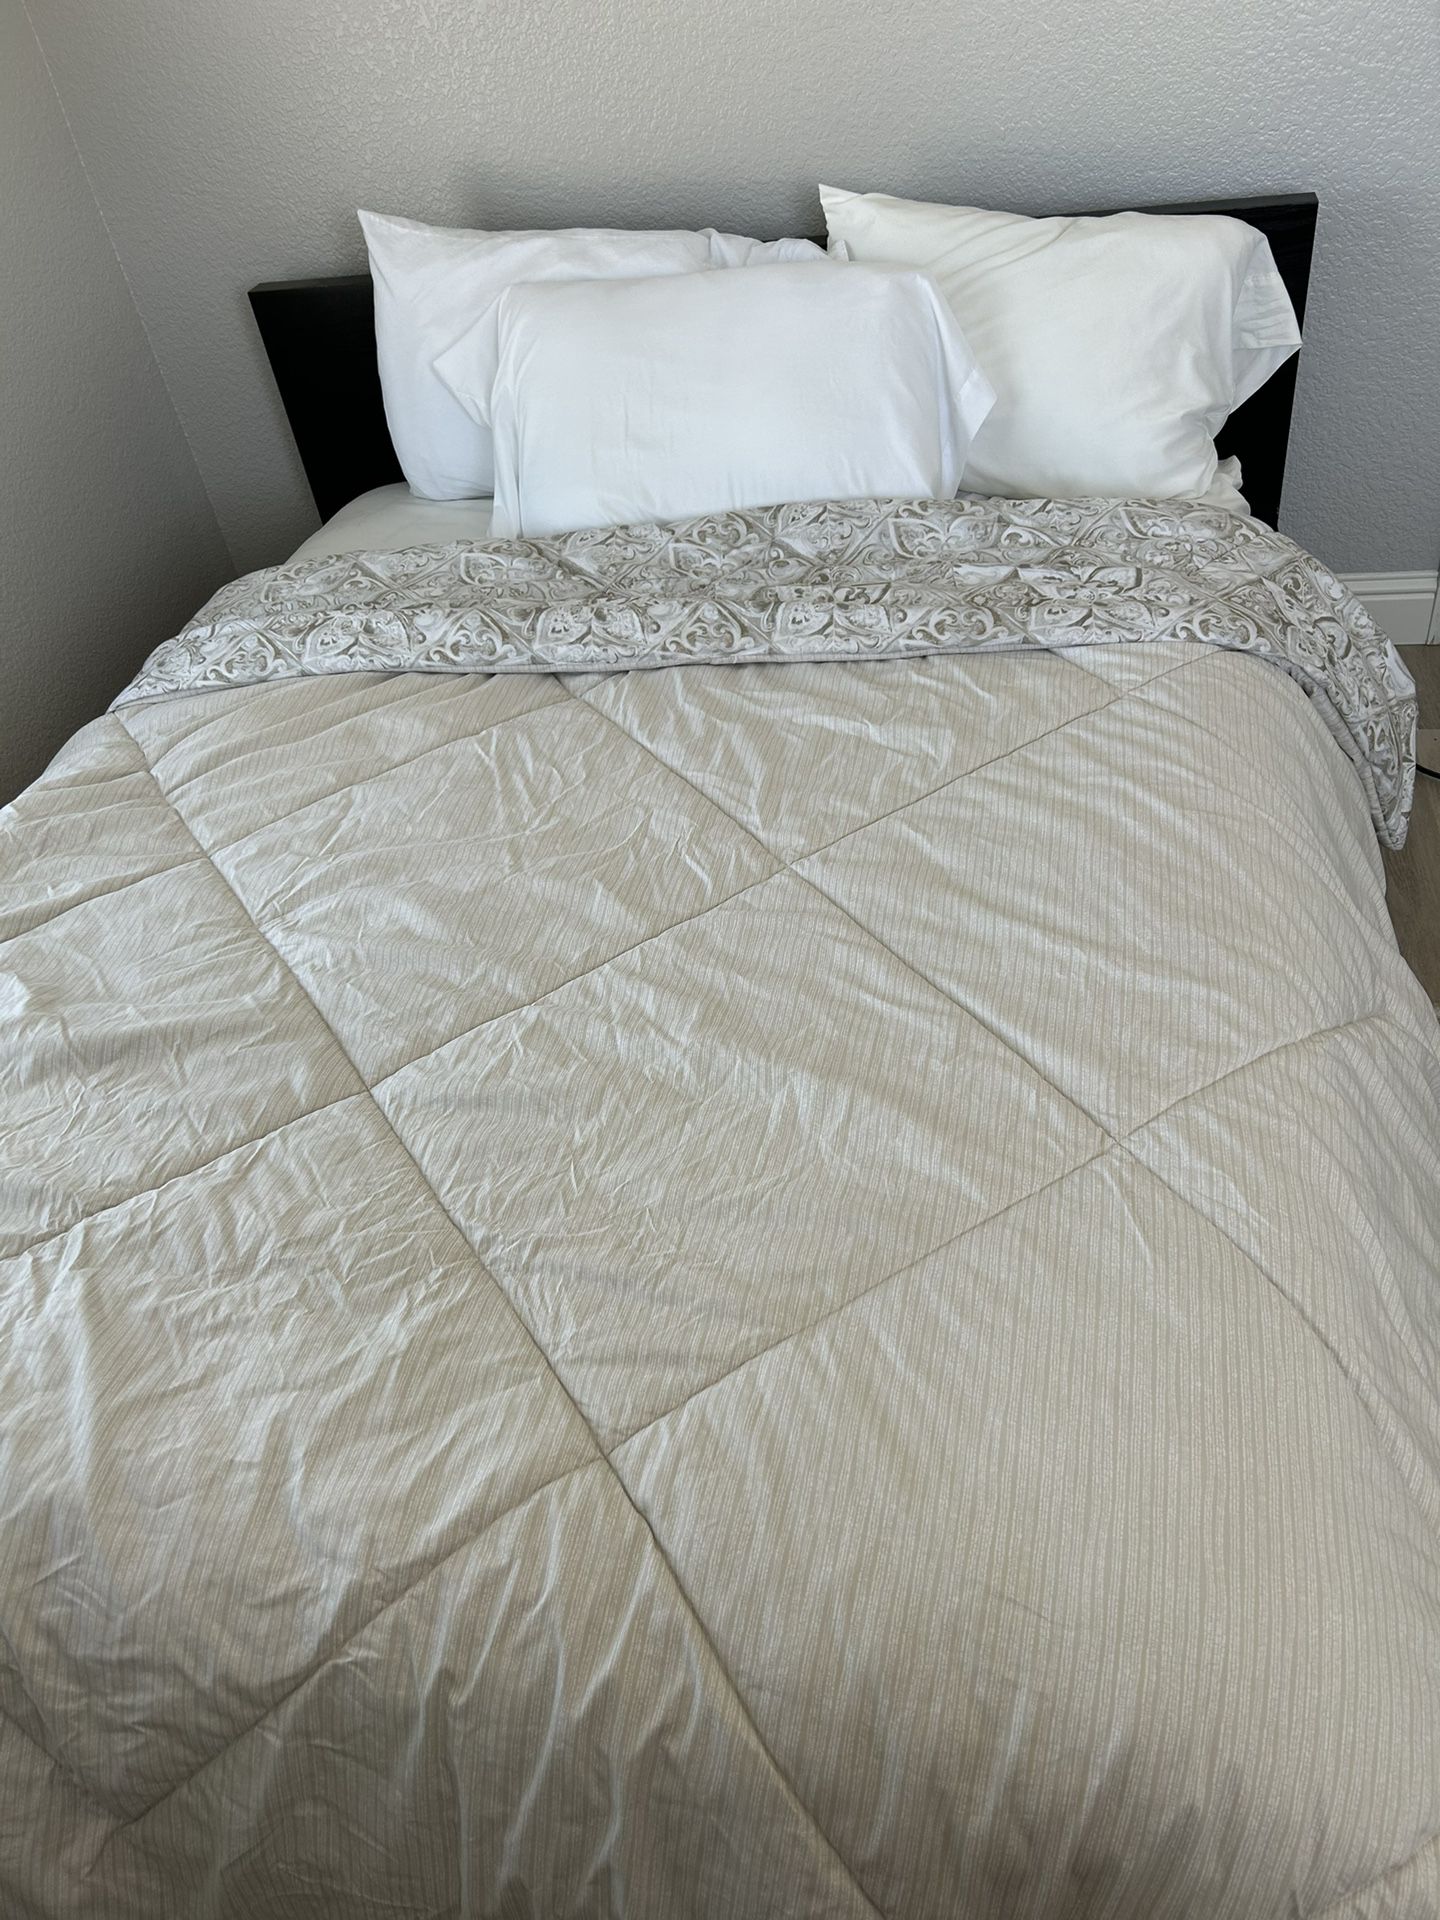 Queen Sealy Mattress And IKEA Malm Bed Frame In Excellent Condition